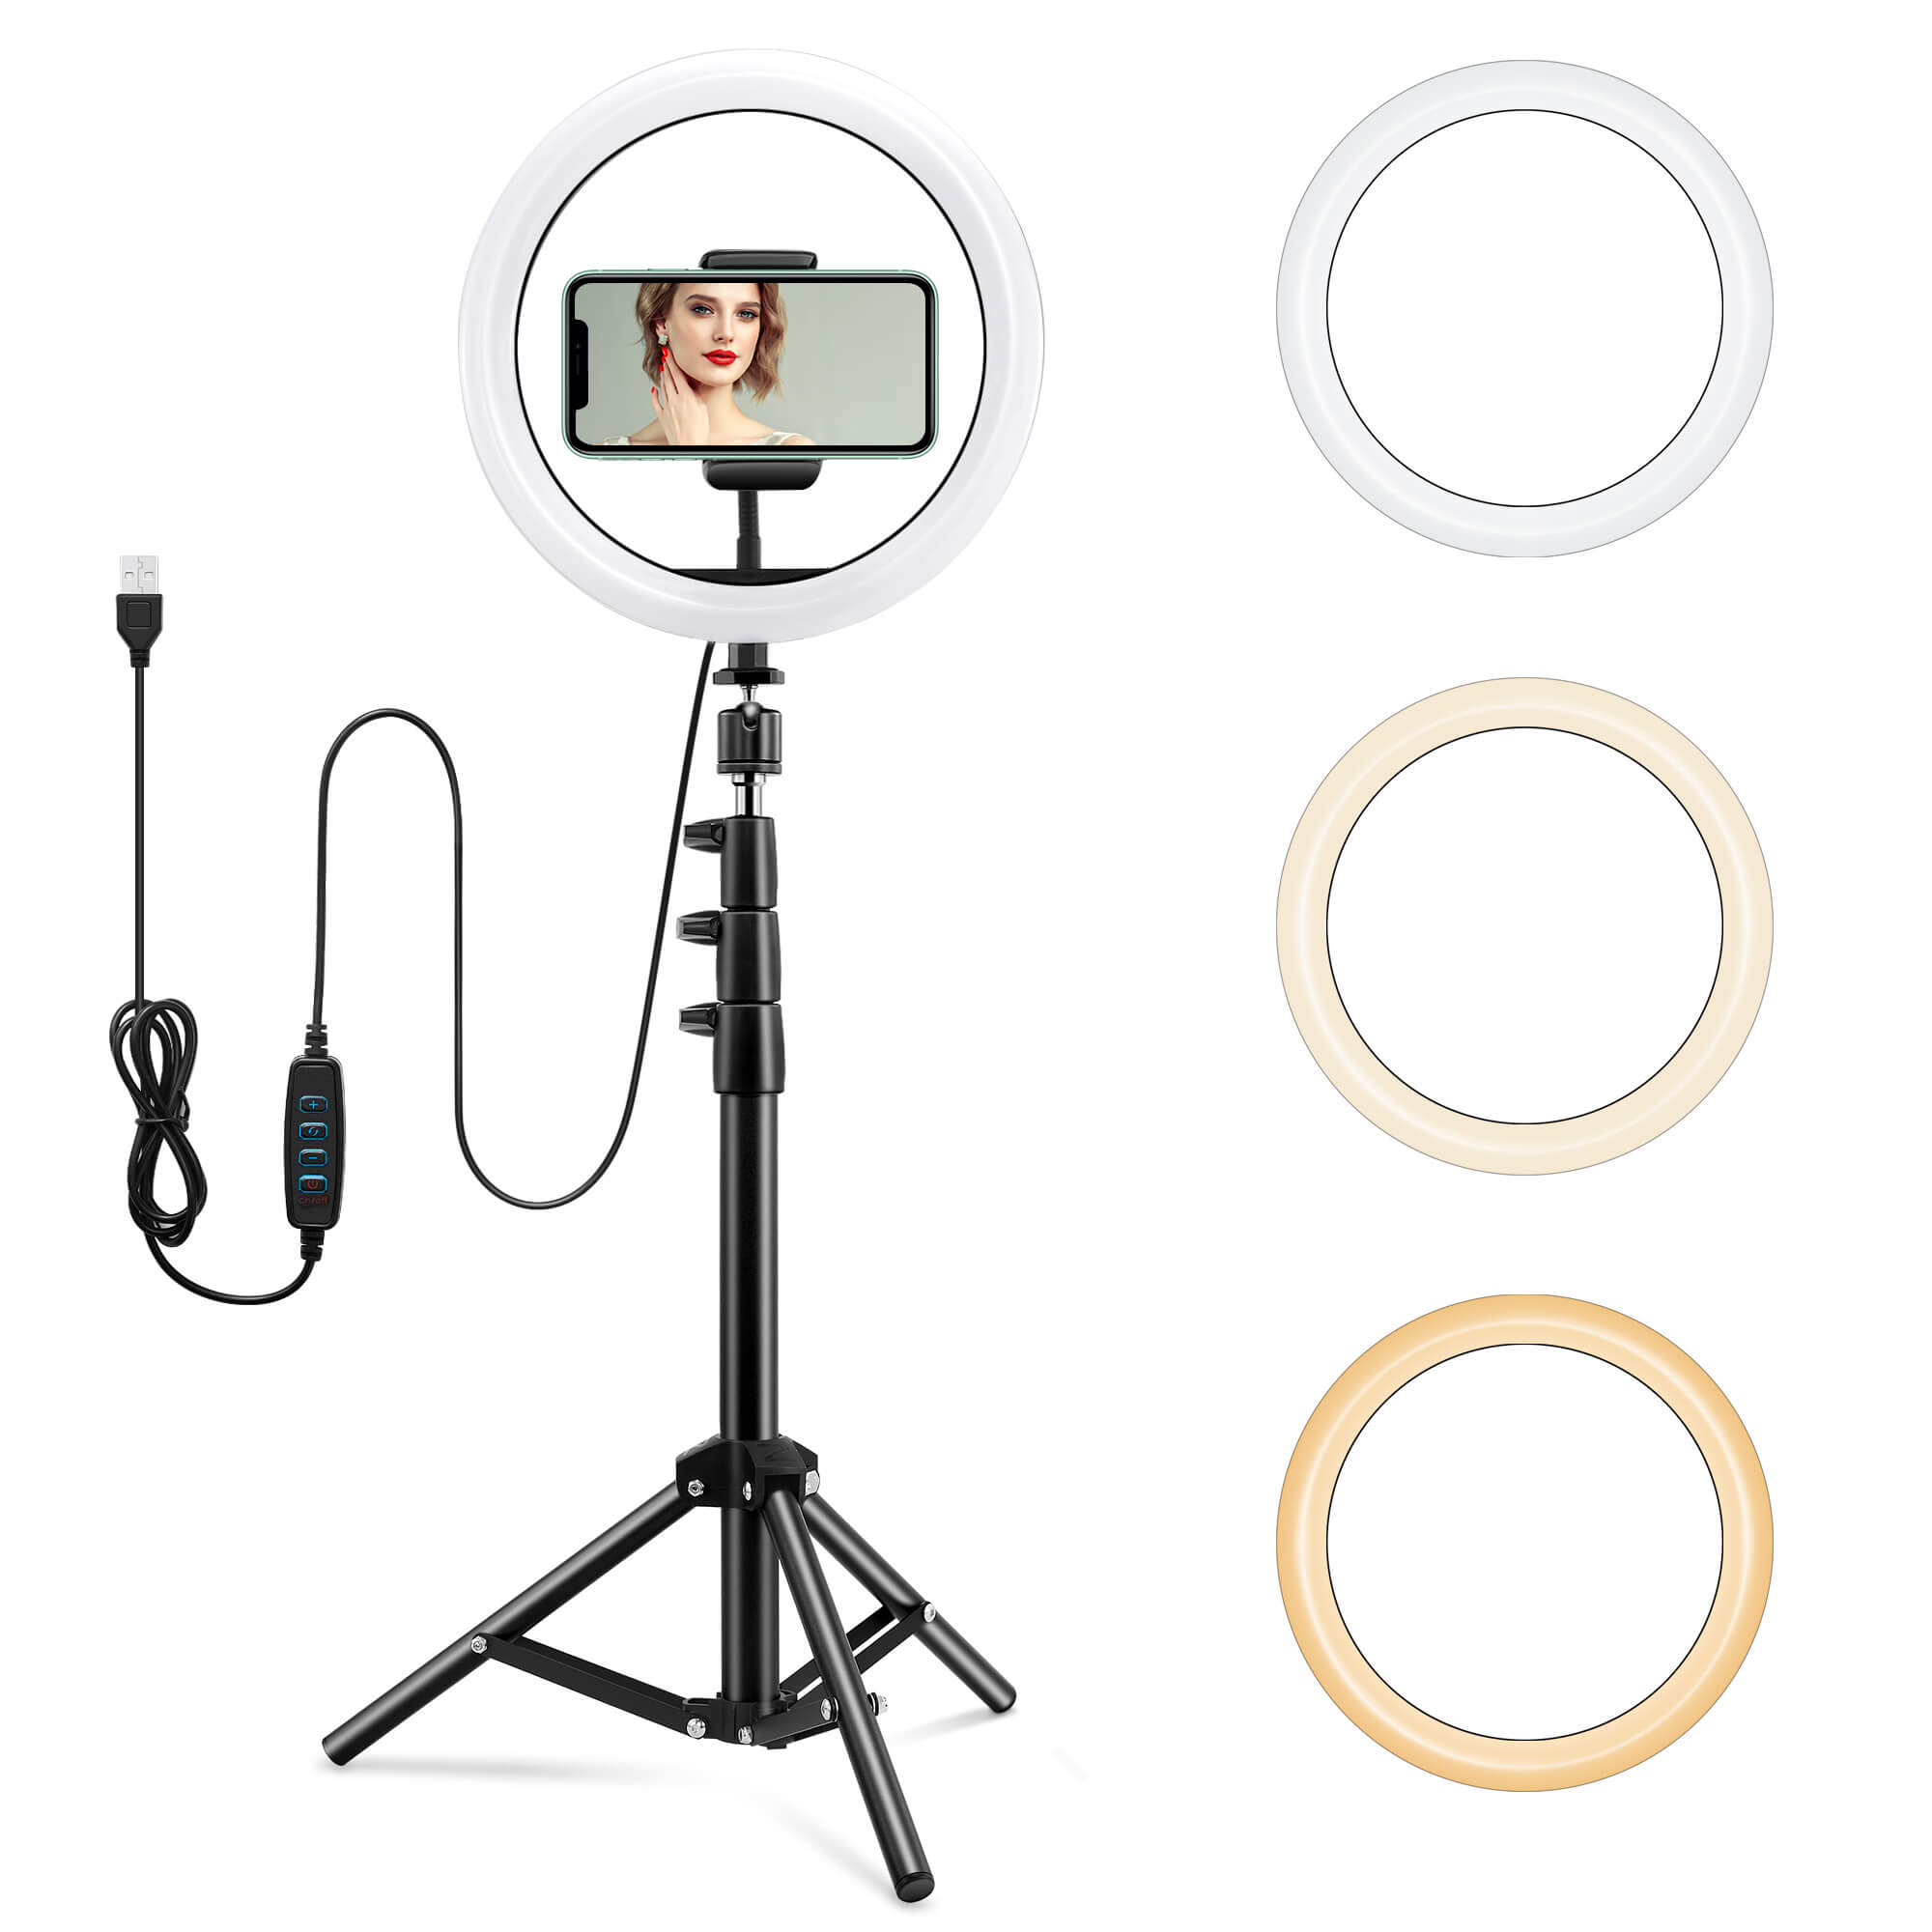 Ring Light for YouTube Video/Live Stream/Makeup/Photography Selfie Ring Light 10.2 Ring Light with Stand and Phone Holder 16.56 to 53.5 3 Lighting Modes and 11 Brightness Levels Adjustable